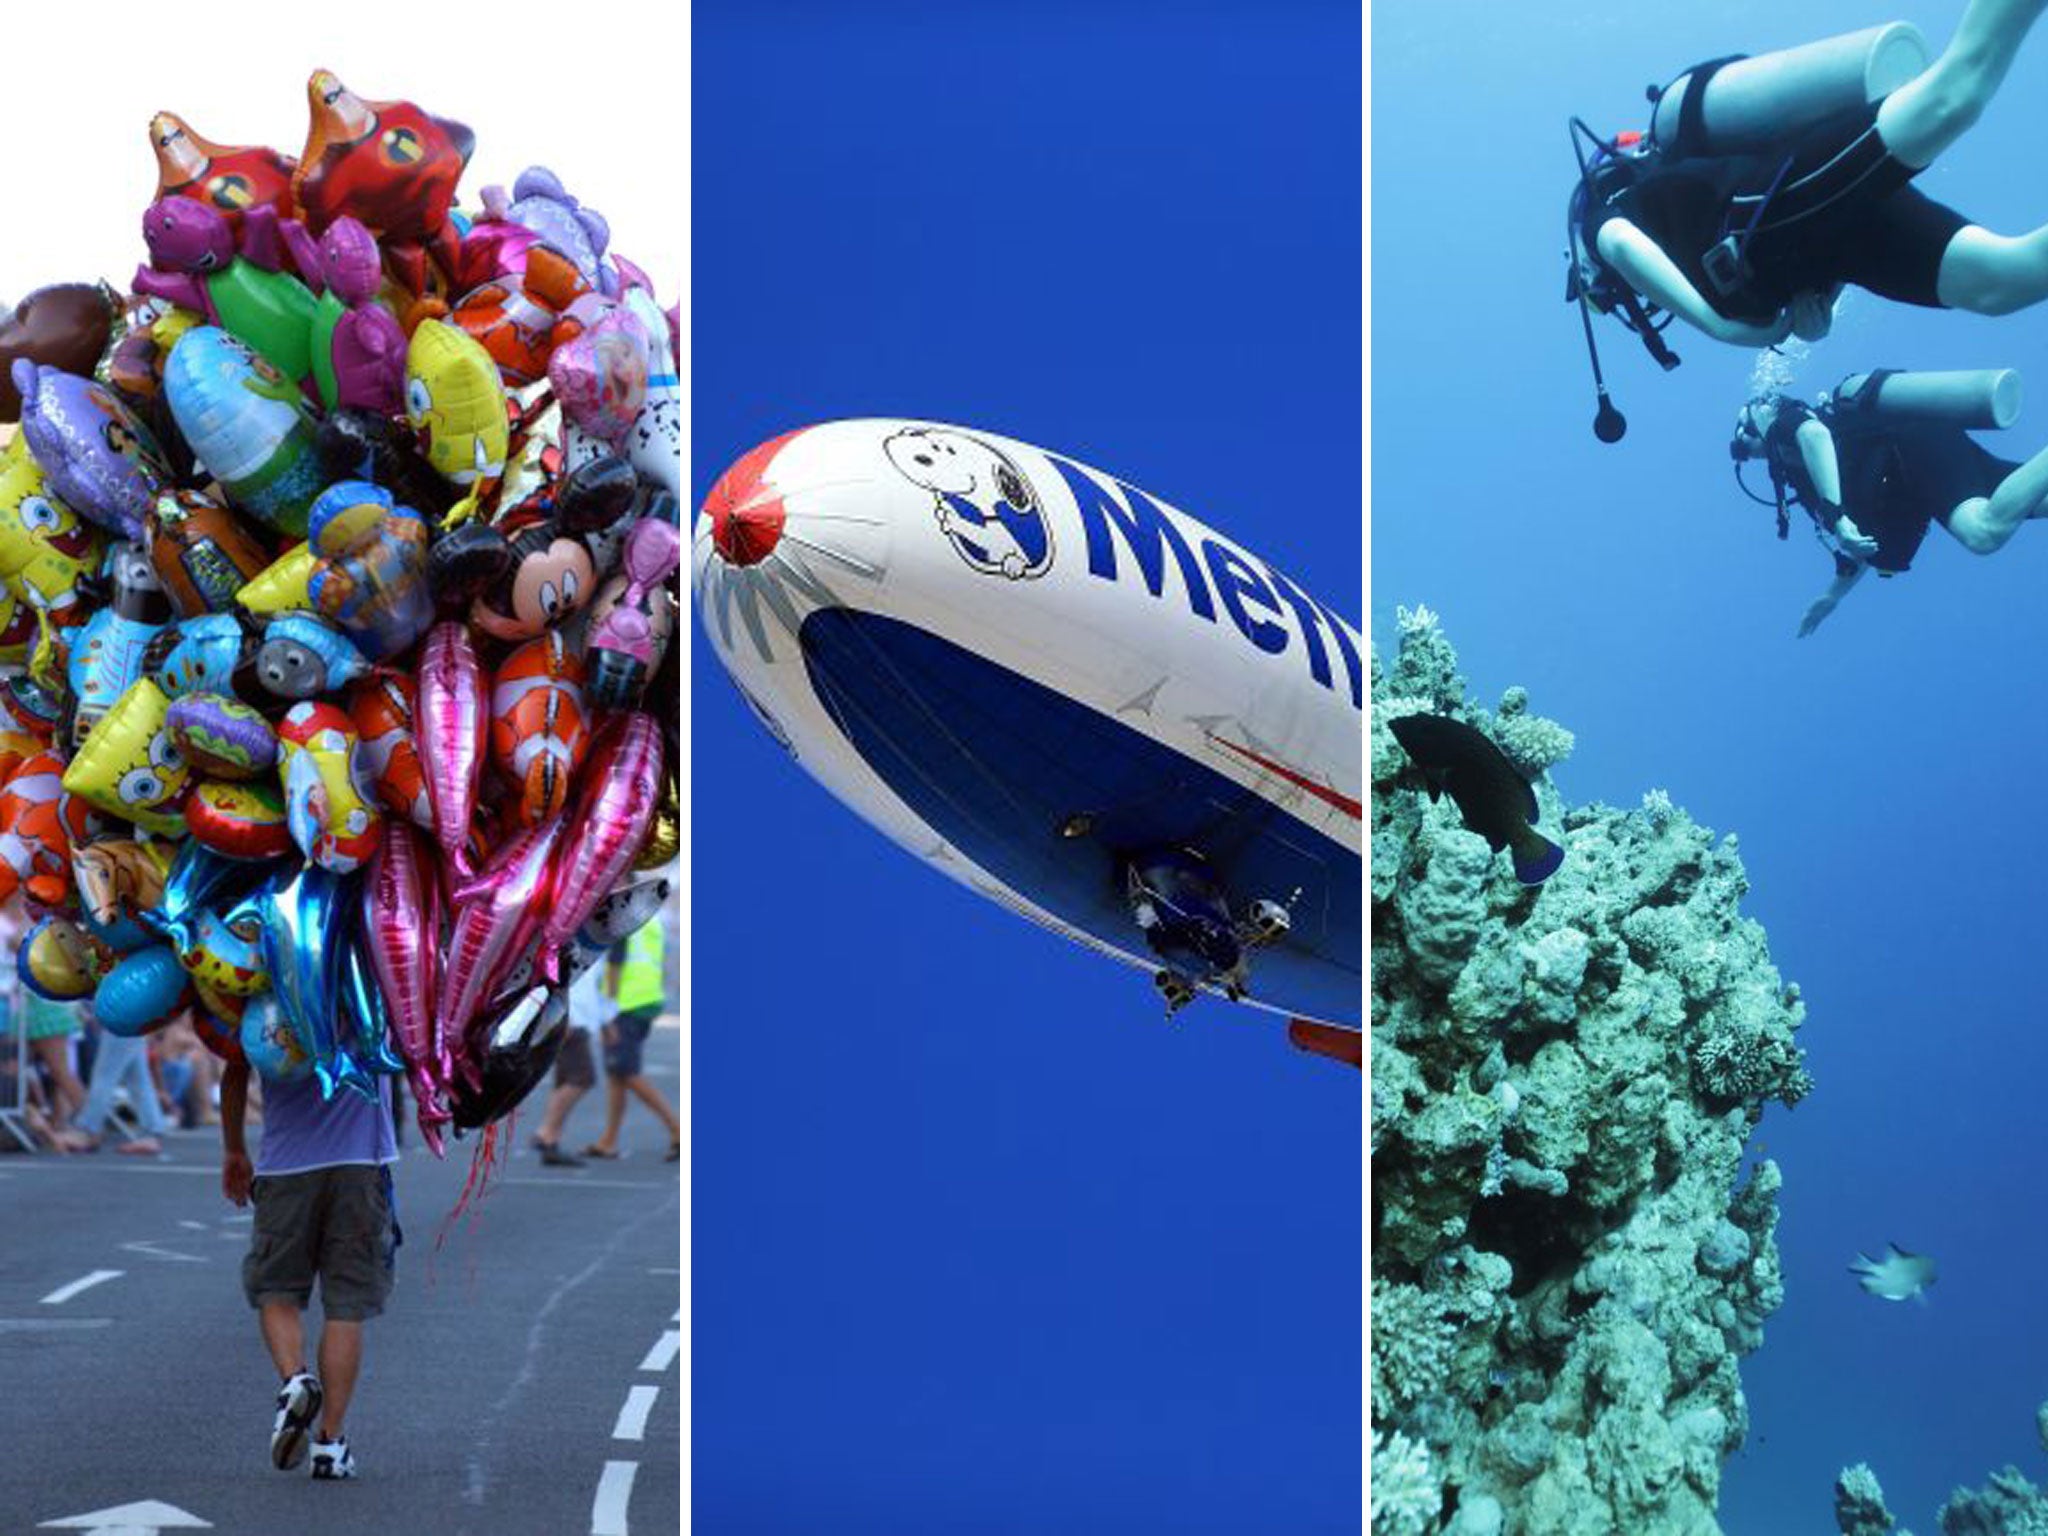 Balloons, a blimp and deep sea divers all require helium